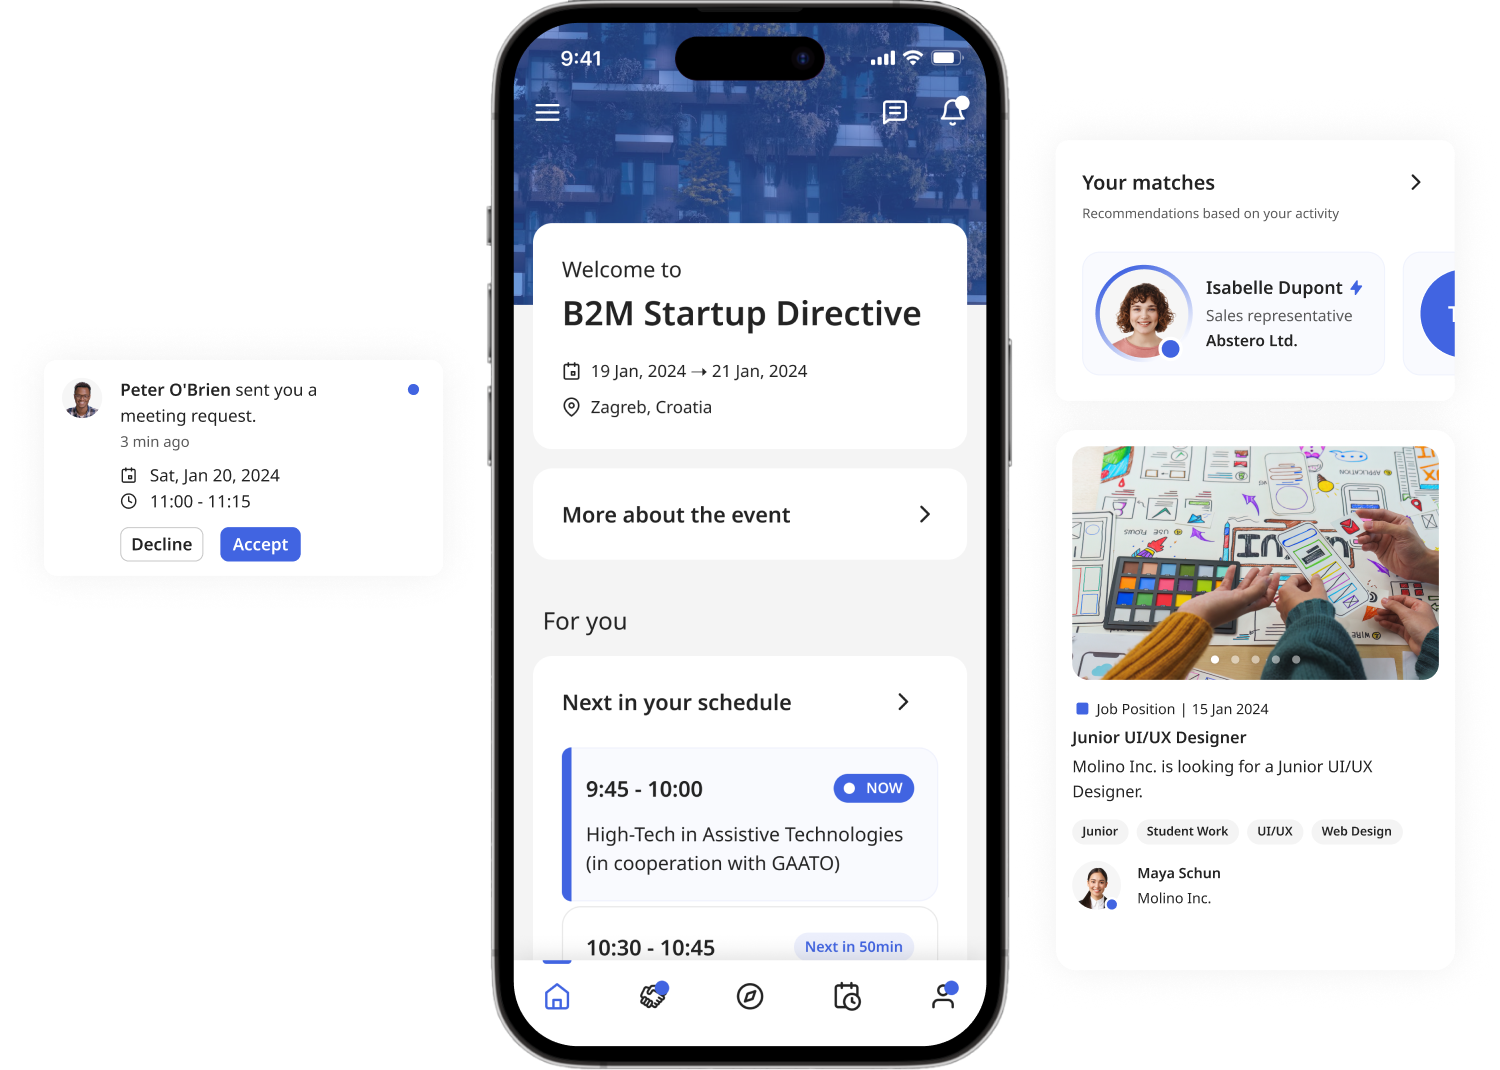 Save your participants' time with an event networking app designed to simplify event attendance and facilitate meaningful B2B connections.